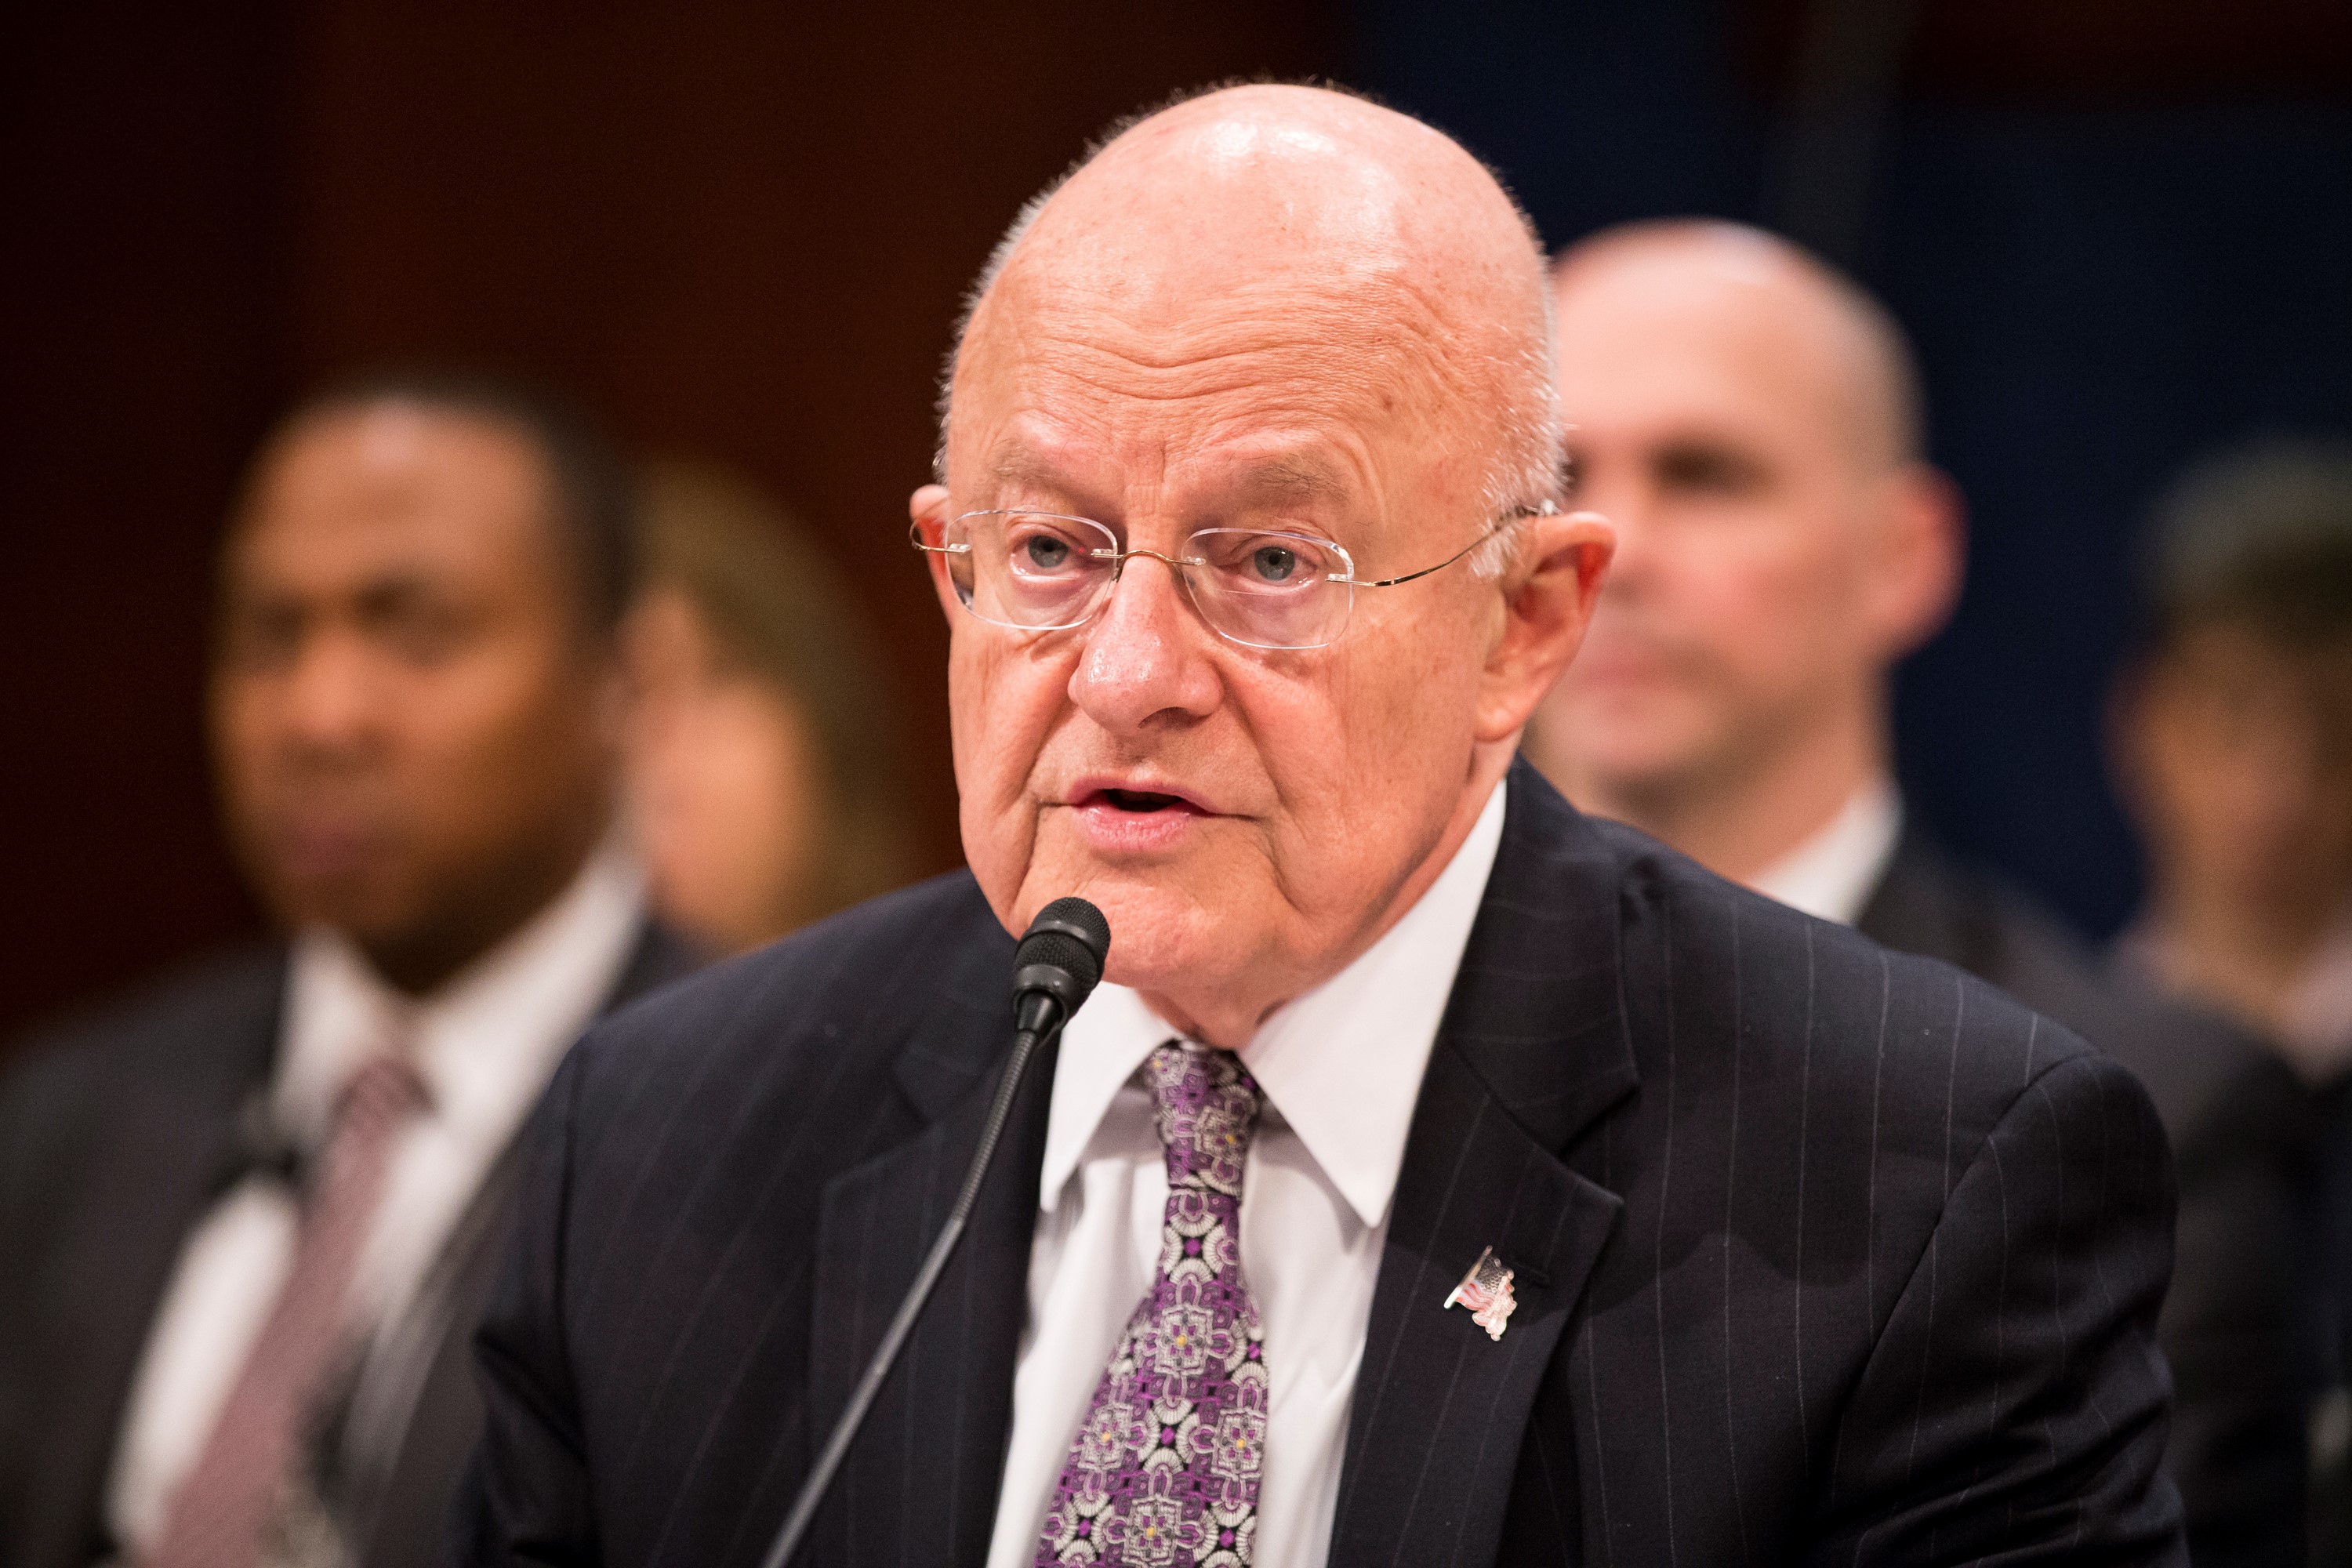 James Clapper, Director of National Intelligence, testifies during a House Intelligence Committee hearing on Worldwide Threats in Washington, on Feb. 25, 2016. (Samuel Corum—Anadolu Agency/Getty Images)